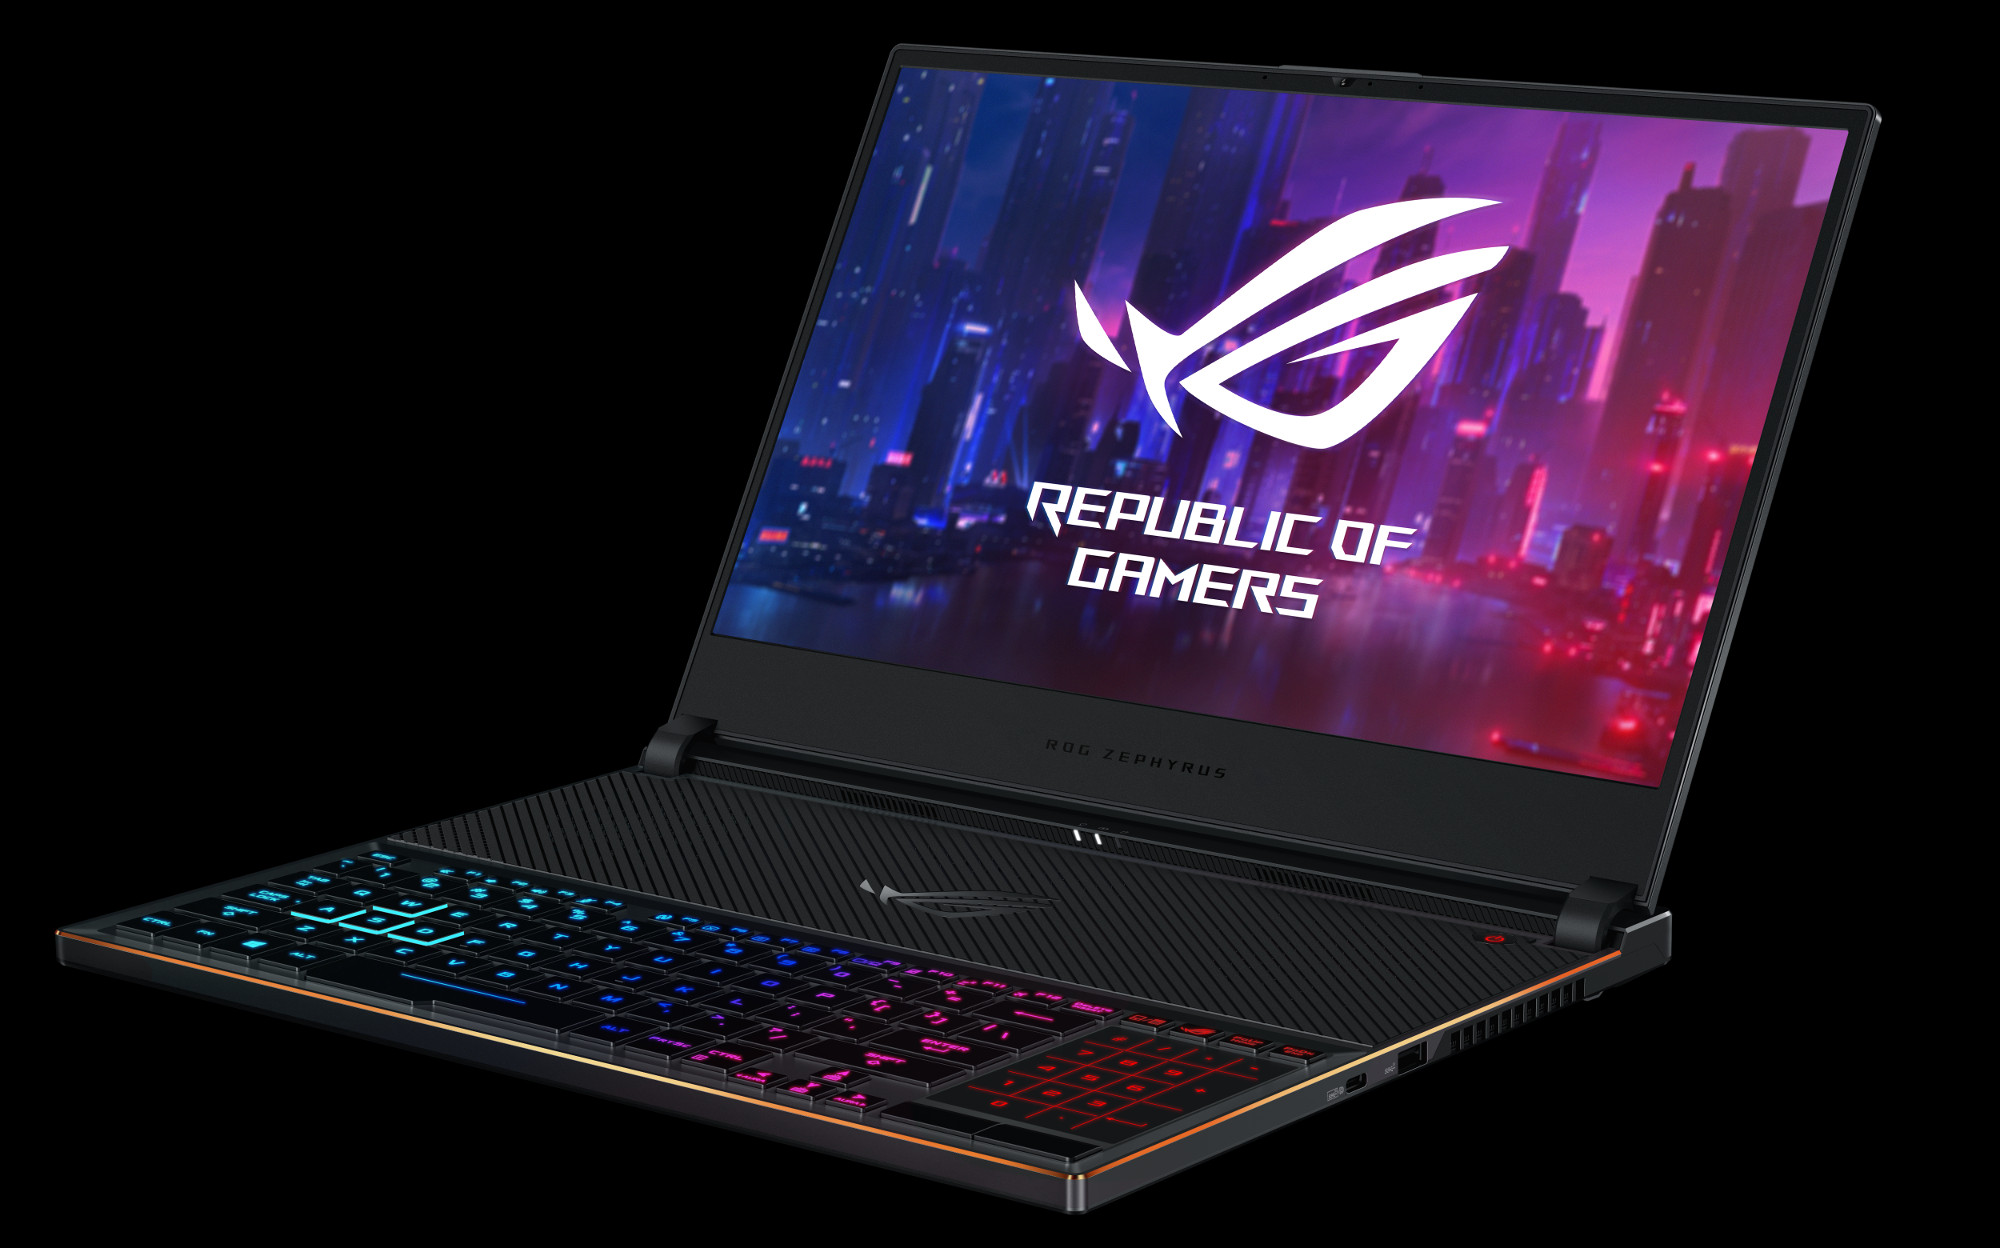 Asus Expands its ROG Lineup in India With Six New Gaming Laptops